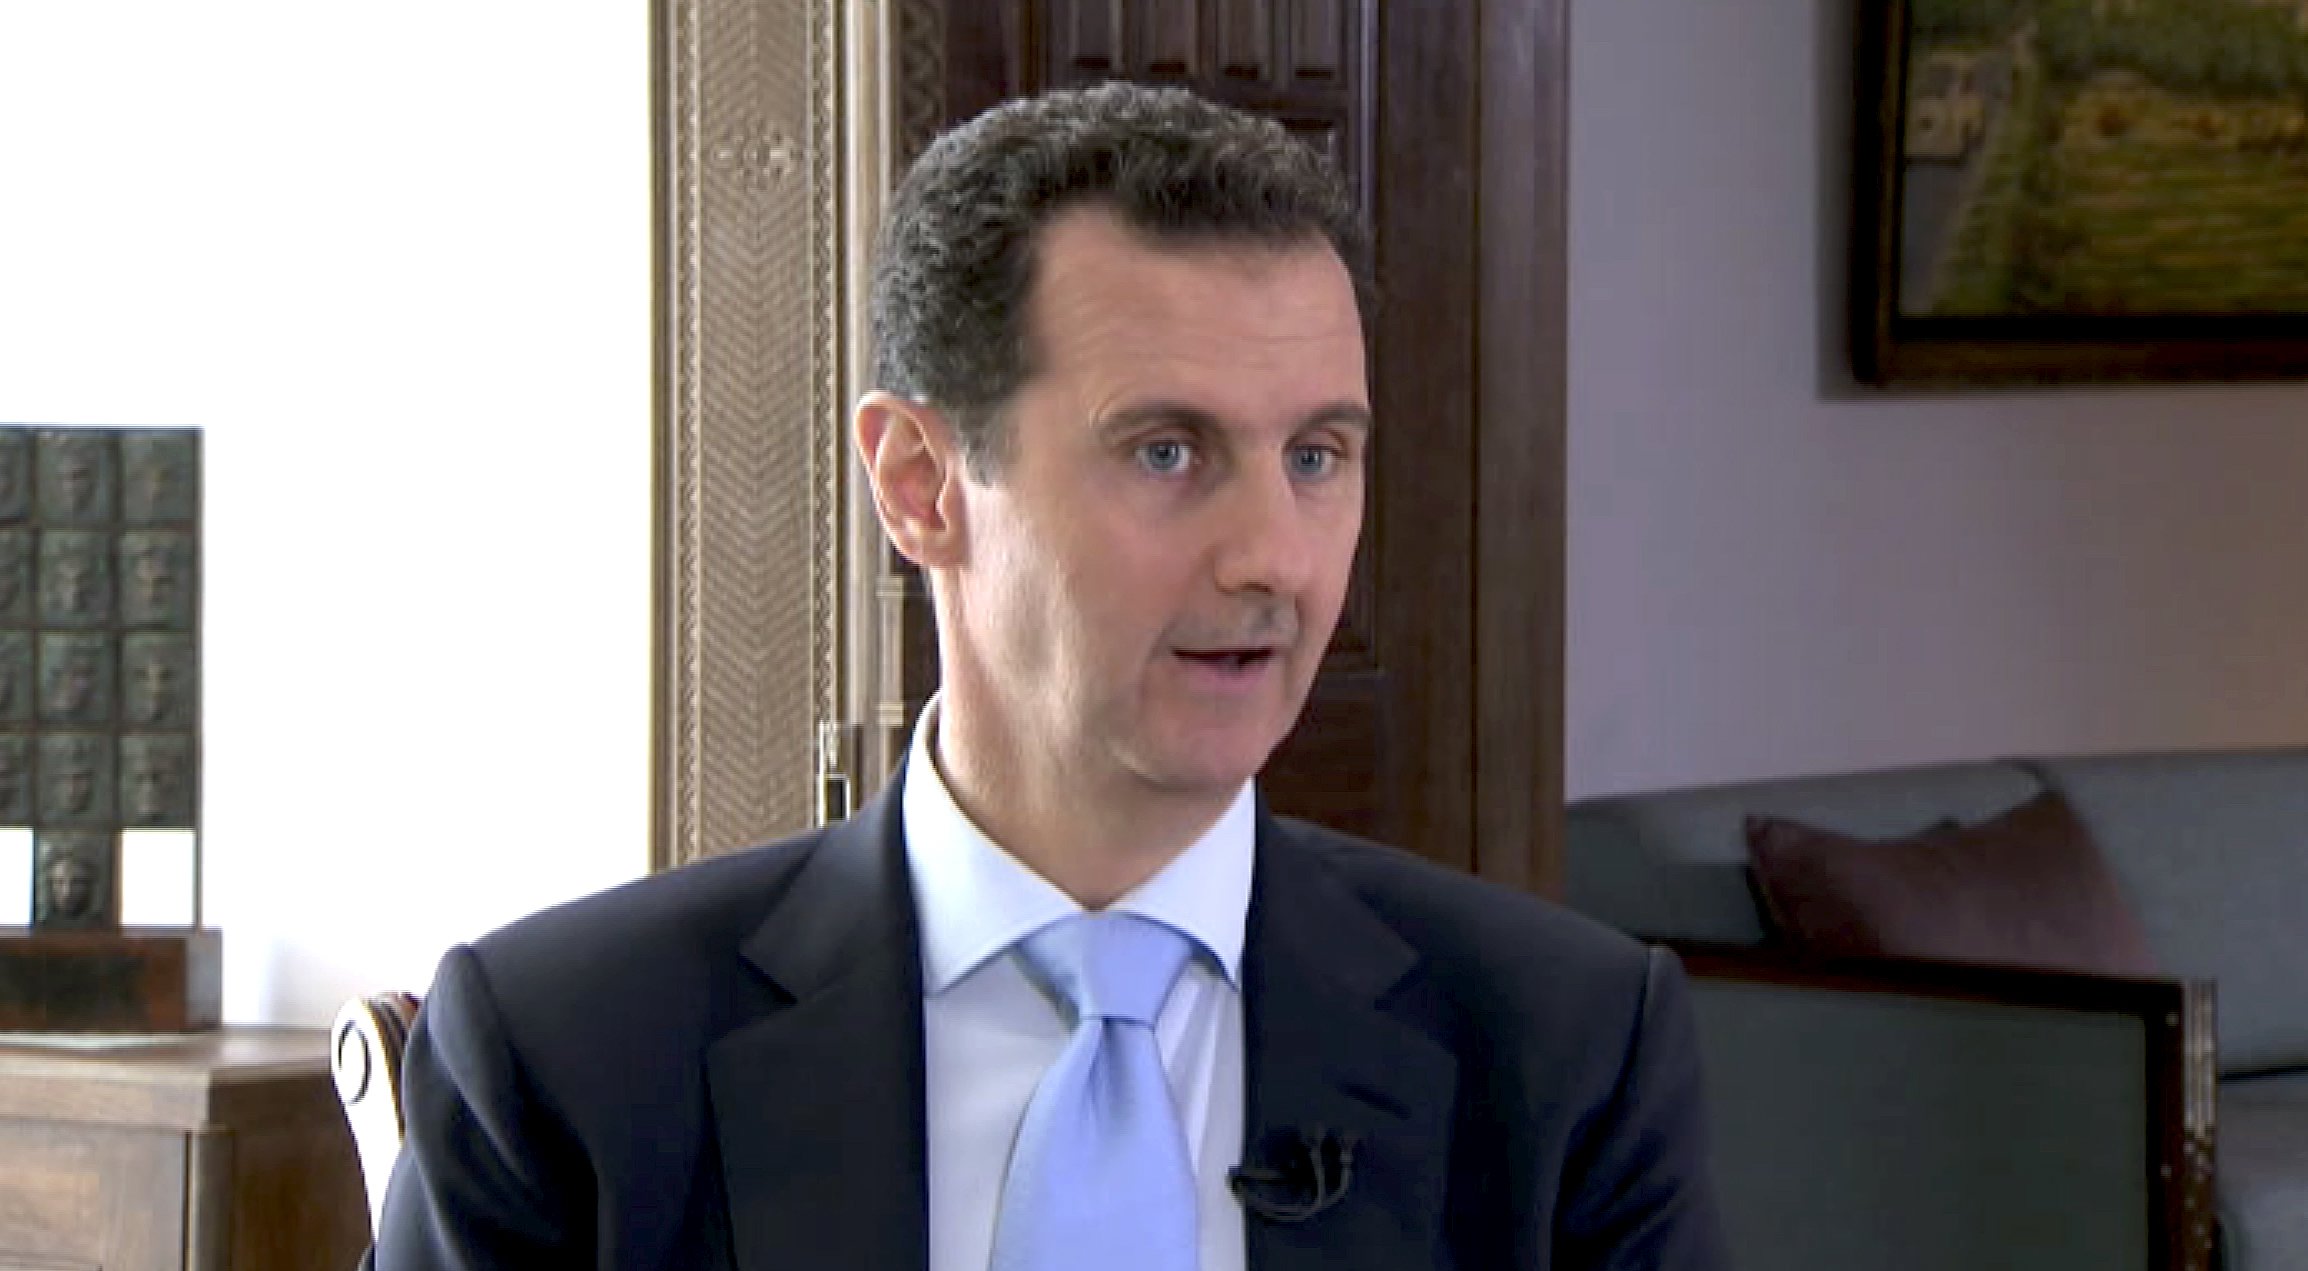 Syria's Assad says he will not negotiate with armed groups